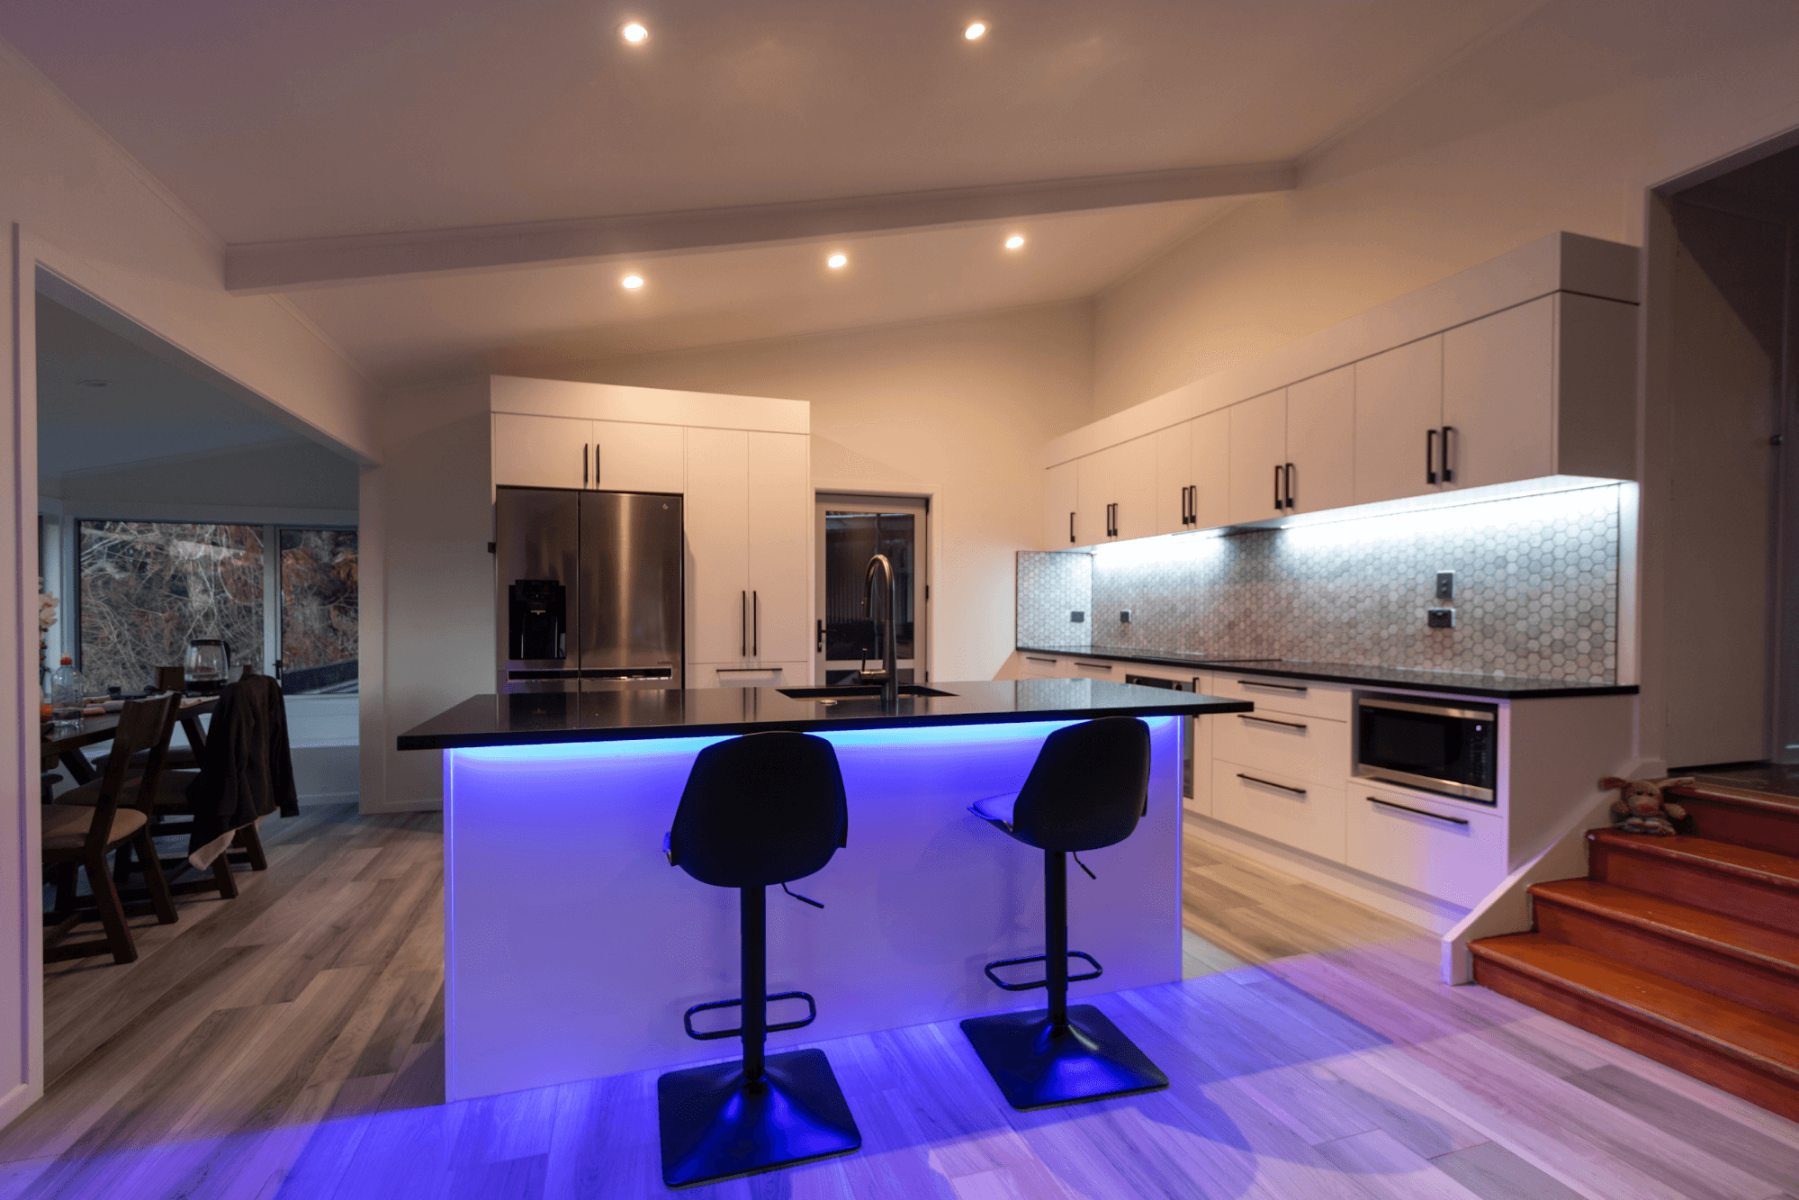 Recessed lighting is one of the options for a modern kitchen